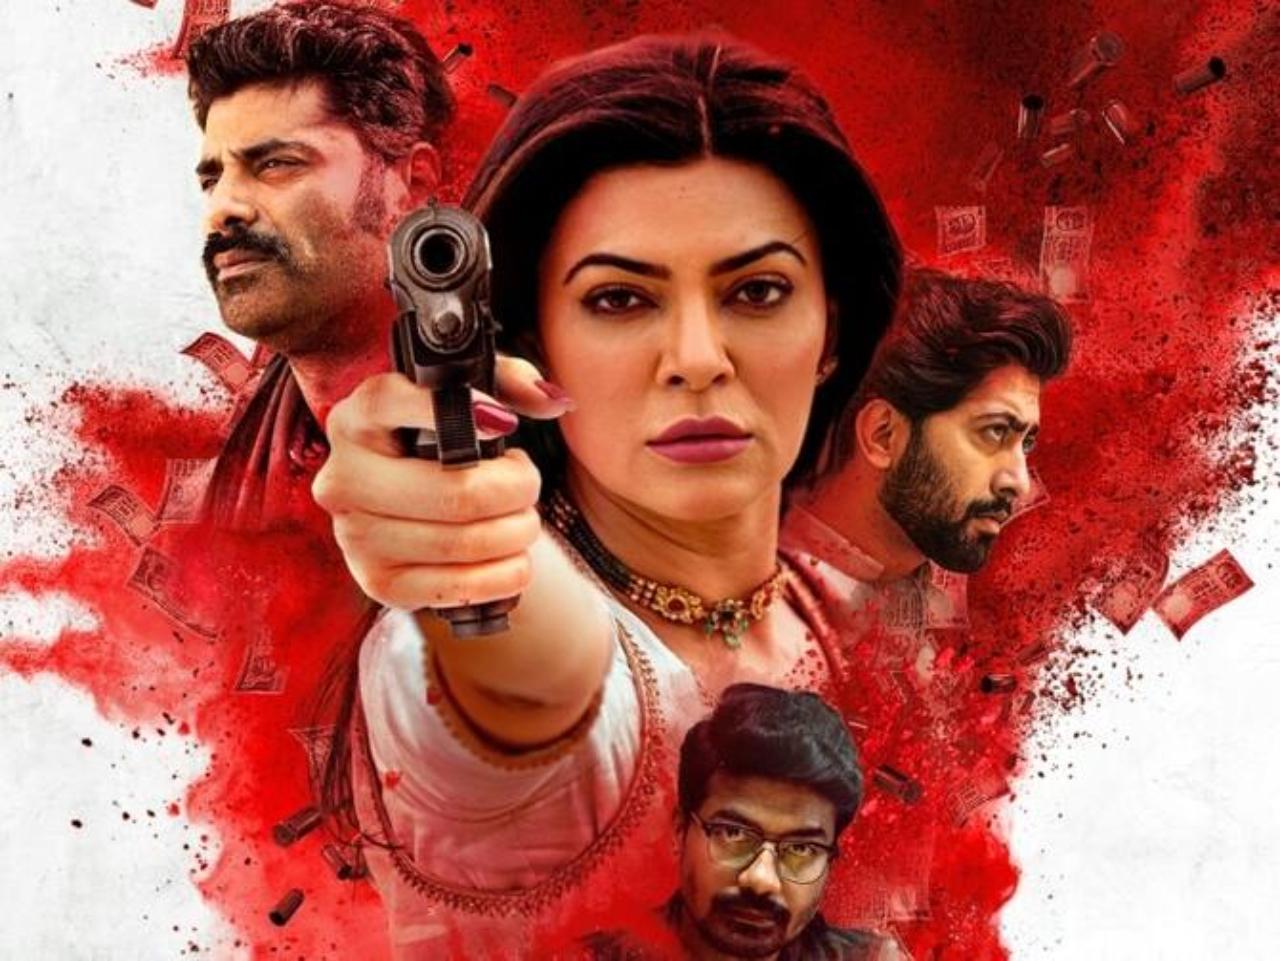 Starring the talented Sushmita Sen, 'Aarya' tells the story of a strong-willed woman who must take over her husband's criminal empire after he is assassinated. As Aarya navigates the dangerous underworld of drugs and violence, she also confronts the challenges of being a mother and protecting her family. With its high-stakes plot and complex characters, 'Aarya' is a masterclass in suspenseful storytelling. But what truly sets the series apart is its portrayal of a woman who refuses to be defined by the expectations of society. Watch 'Aarya' Season 1 and 2 on Disney+Hotstar to witness the strength of women who refuse to back down in the face of adversity.